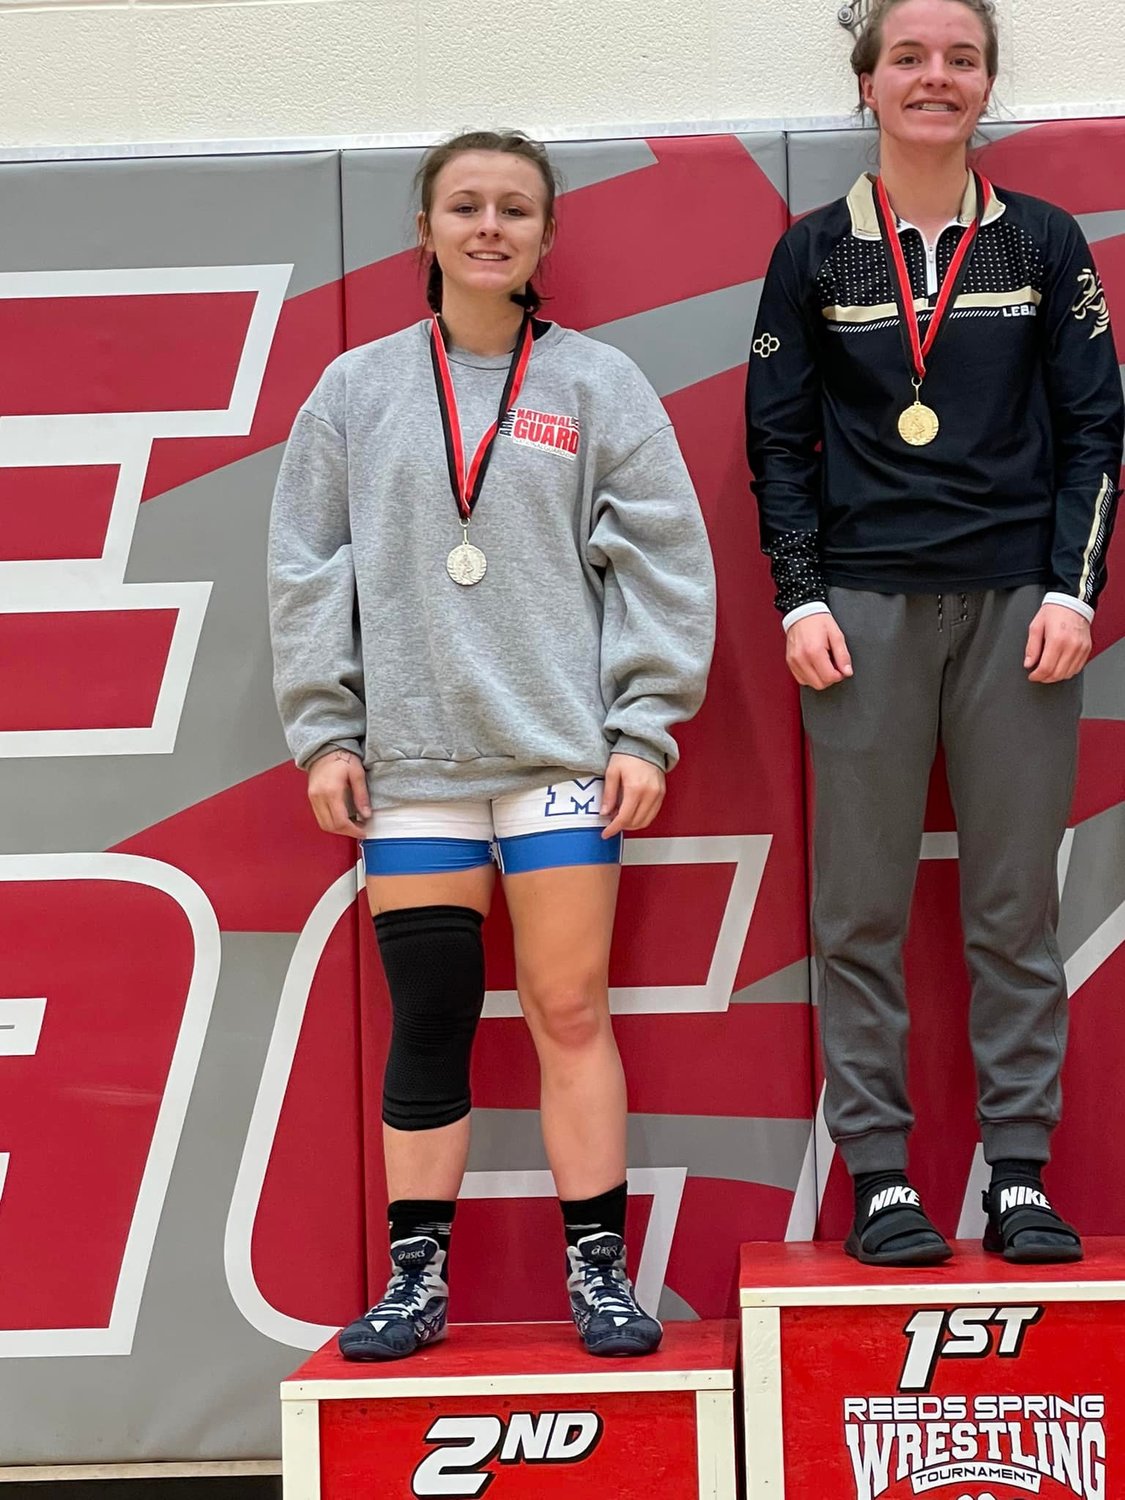 Alissa Hughey (pictured) along with Macie James, Camryn Elliott and 
Coleigh Page took home second place medals at the tournament.